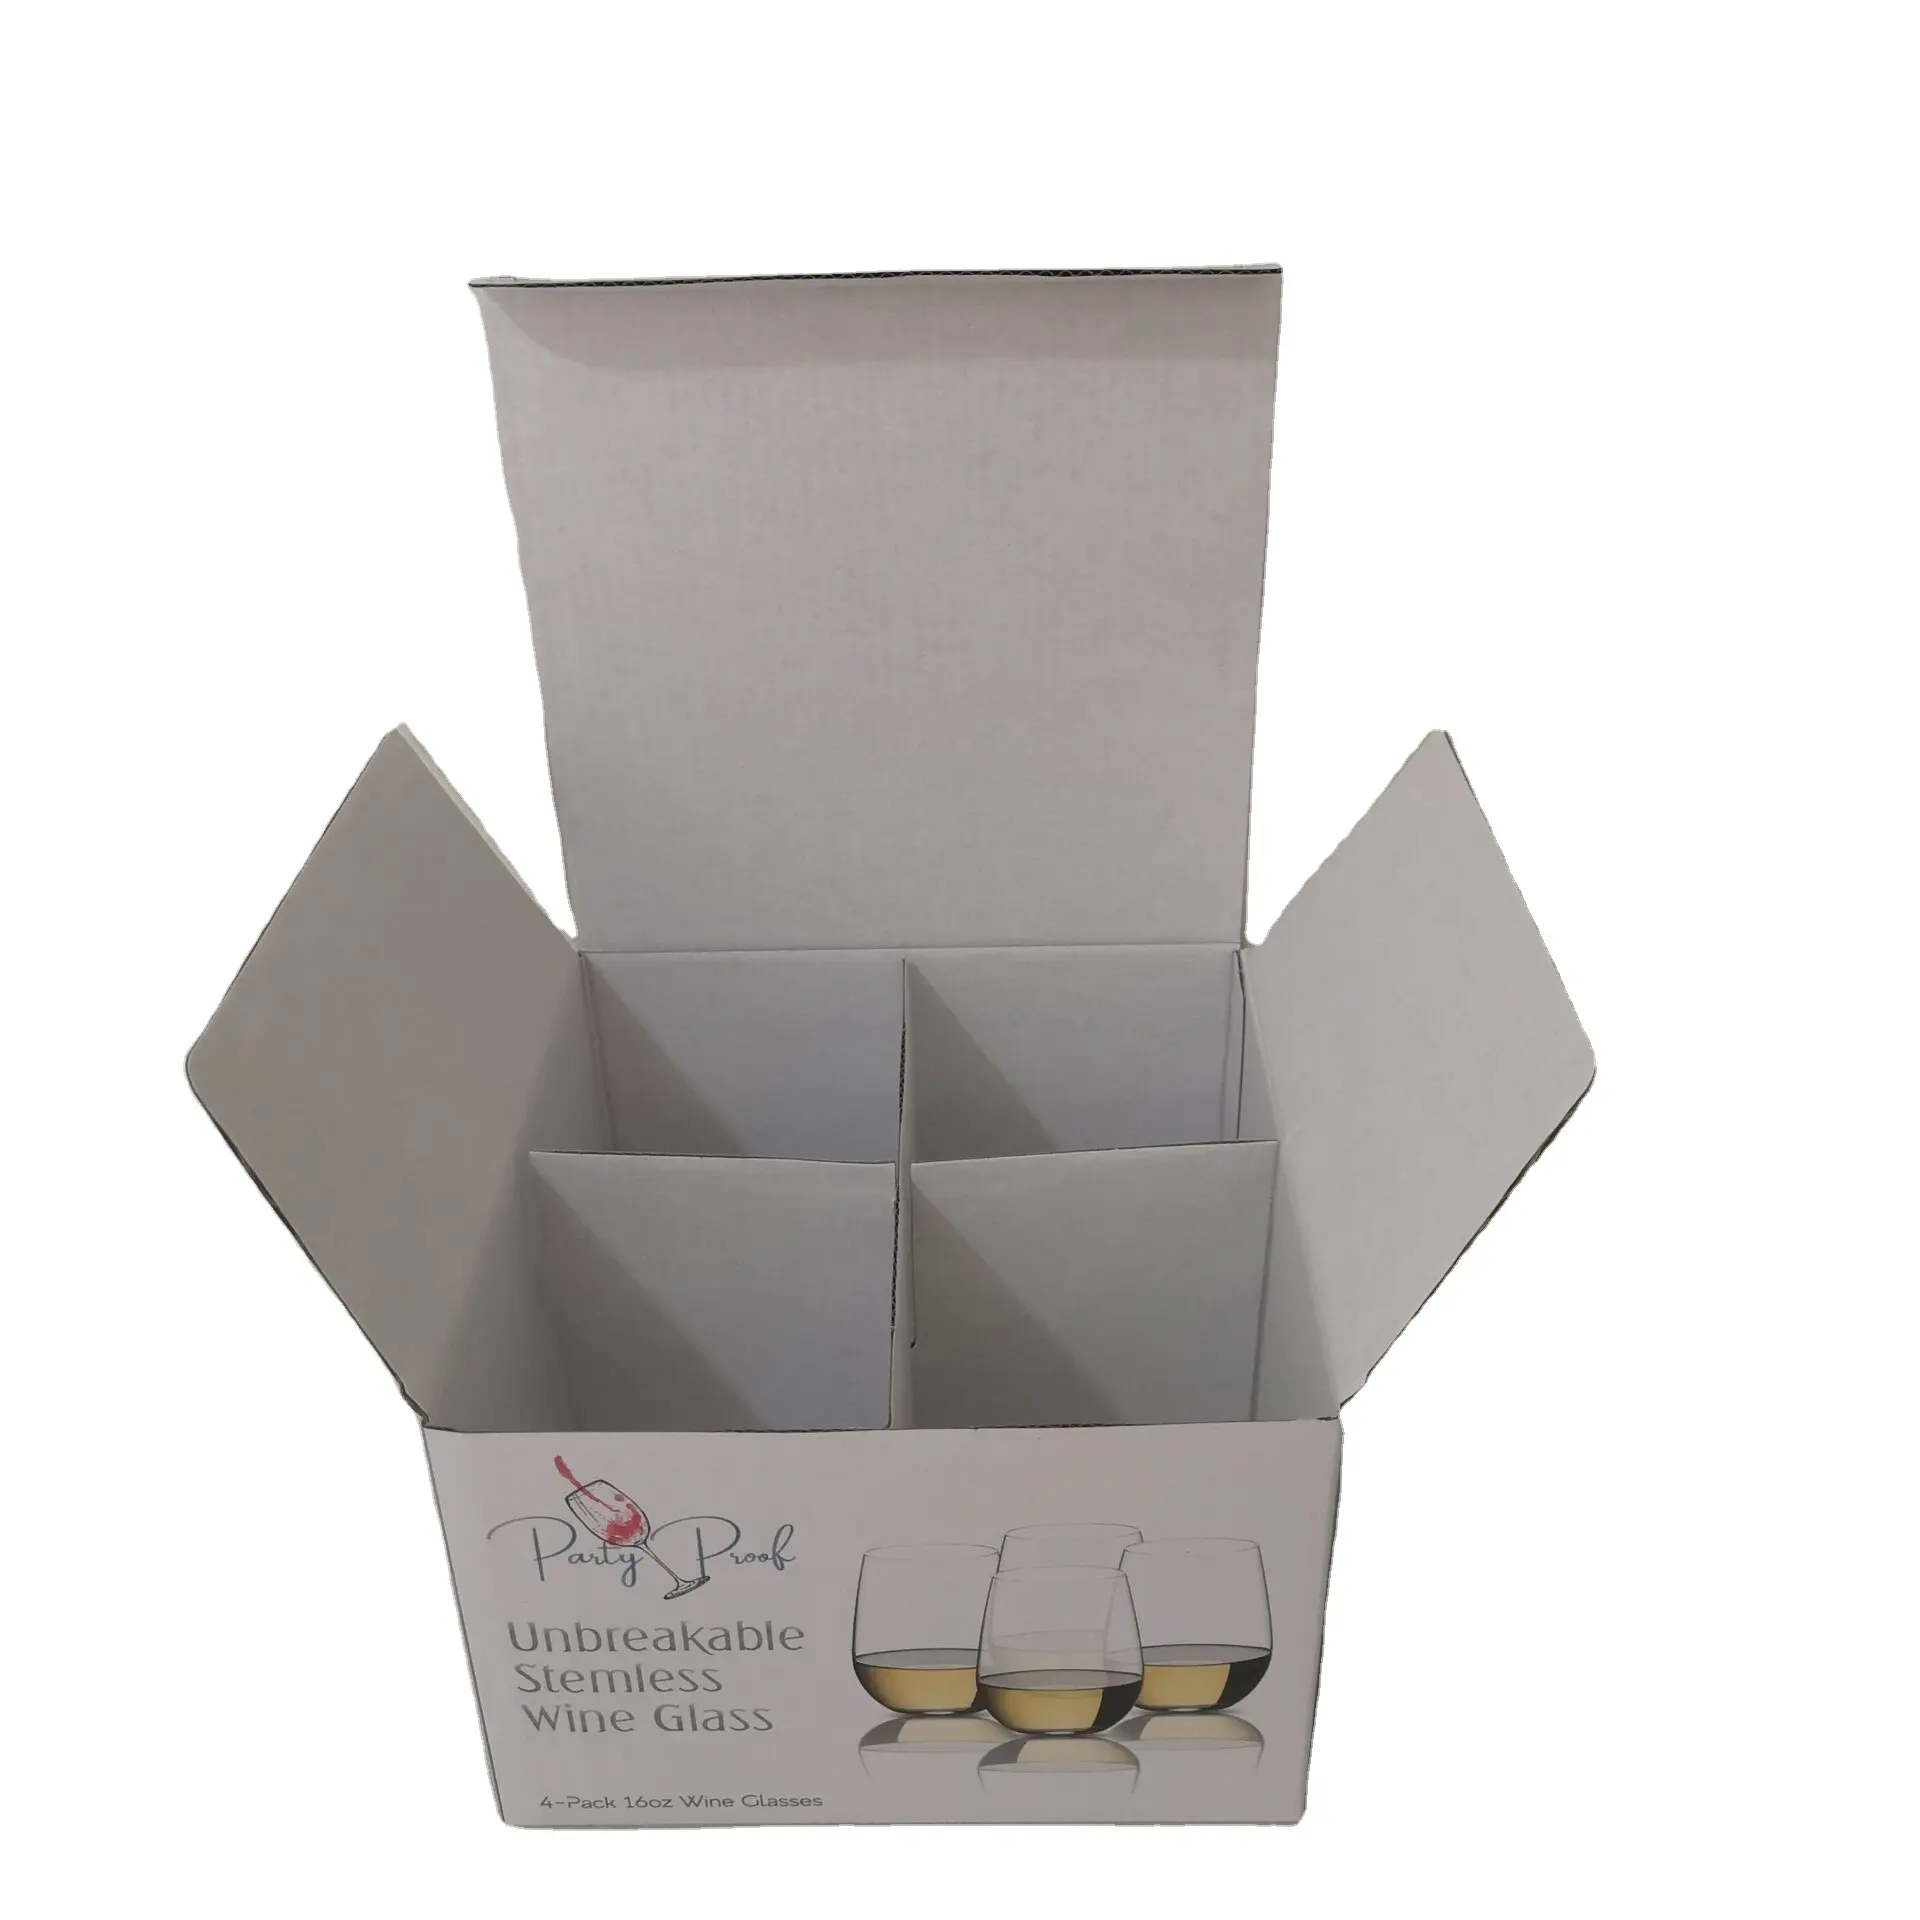 4 pack Protective white cardboard wine glass packaging box with divider